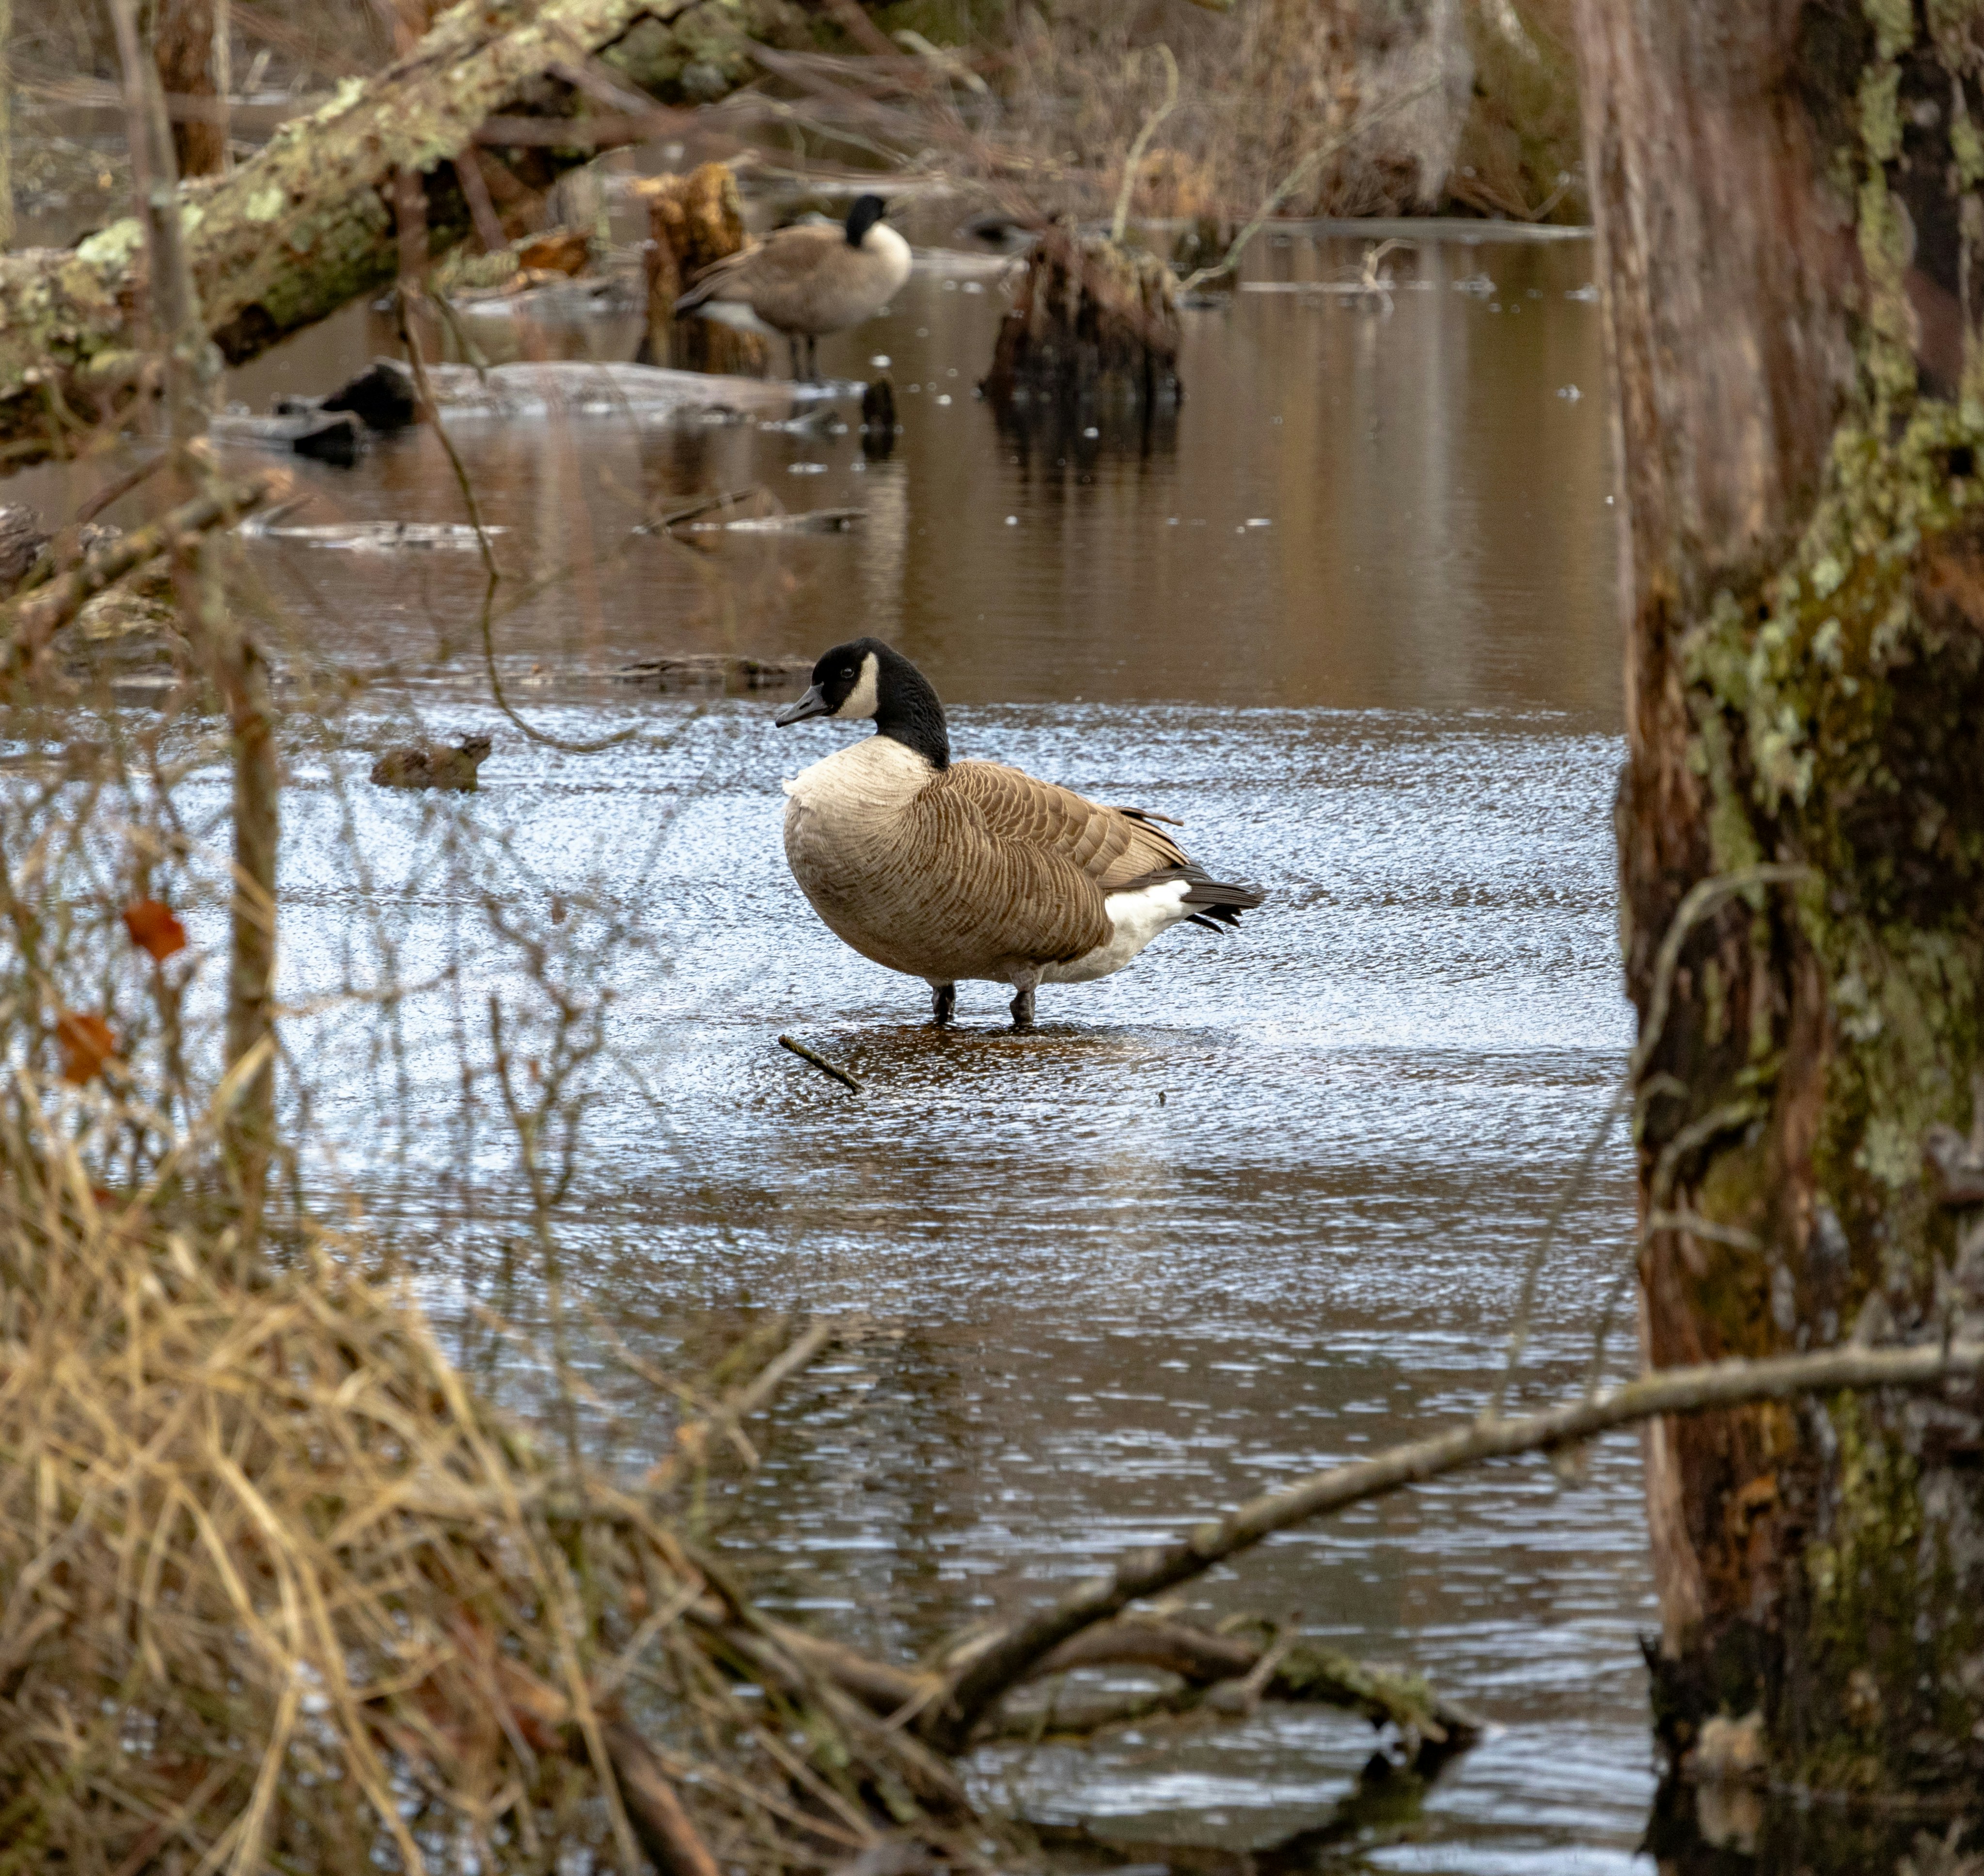 Canadian goose standing in shallow water.